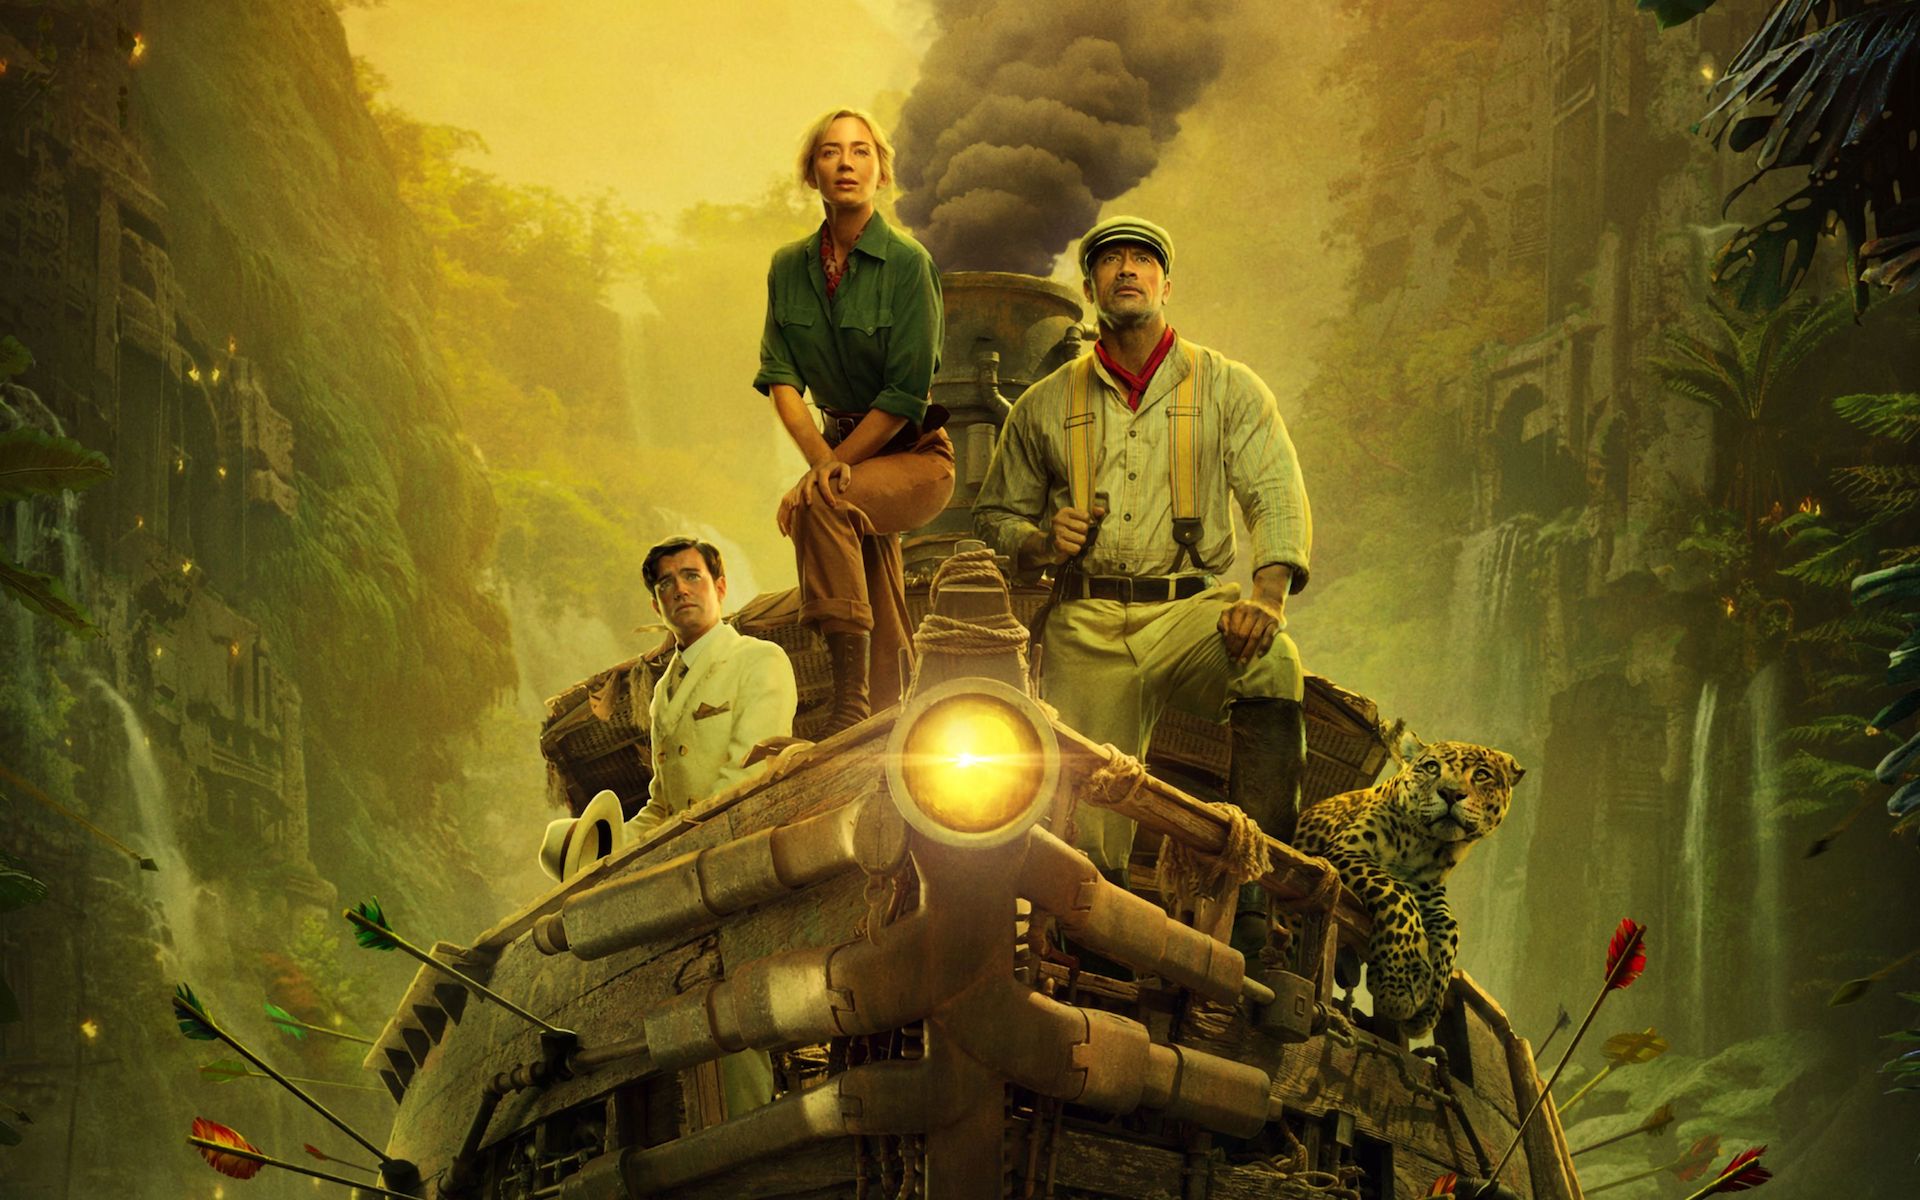 Film Review: Jungle Cruise is charming, old-fashioned fun bolstered by the chemistry of Dwayne Johnson and Emily Blunt - The AU Review